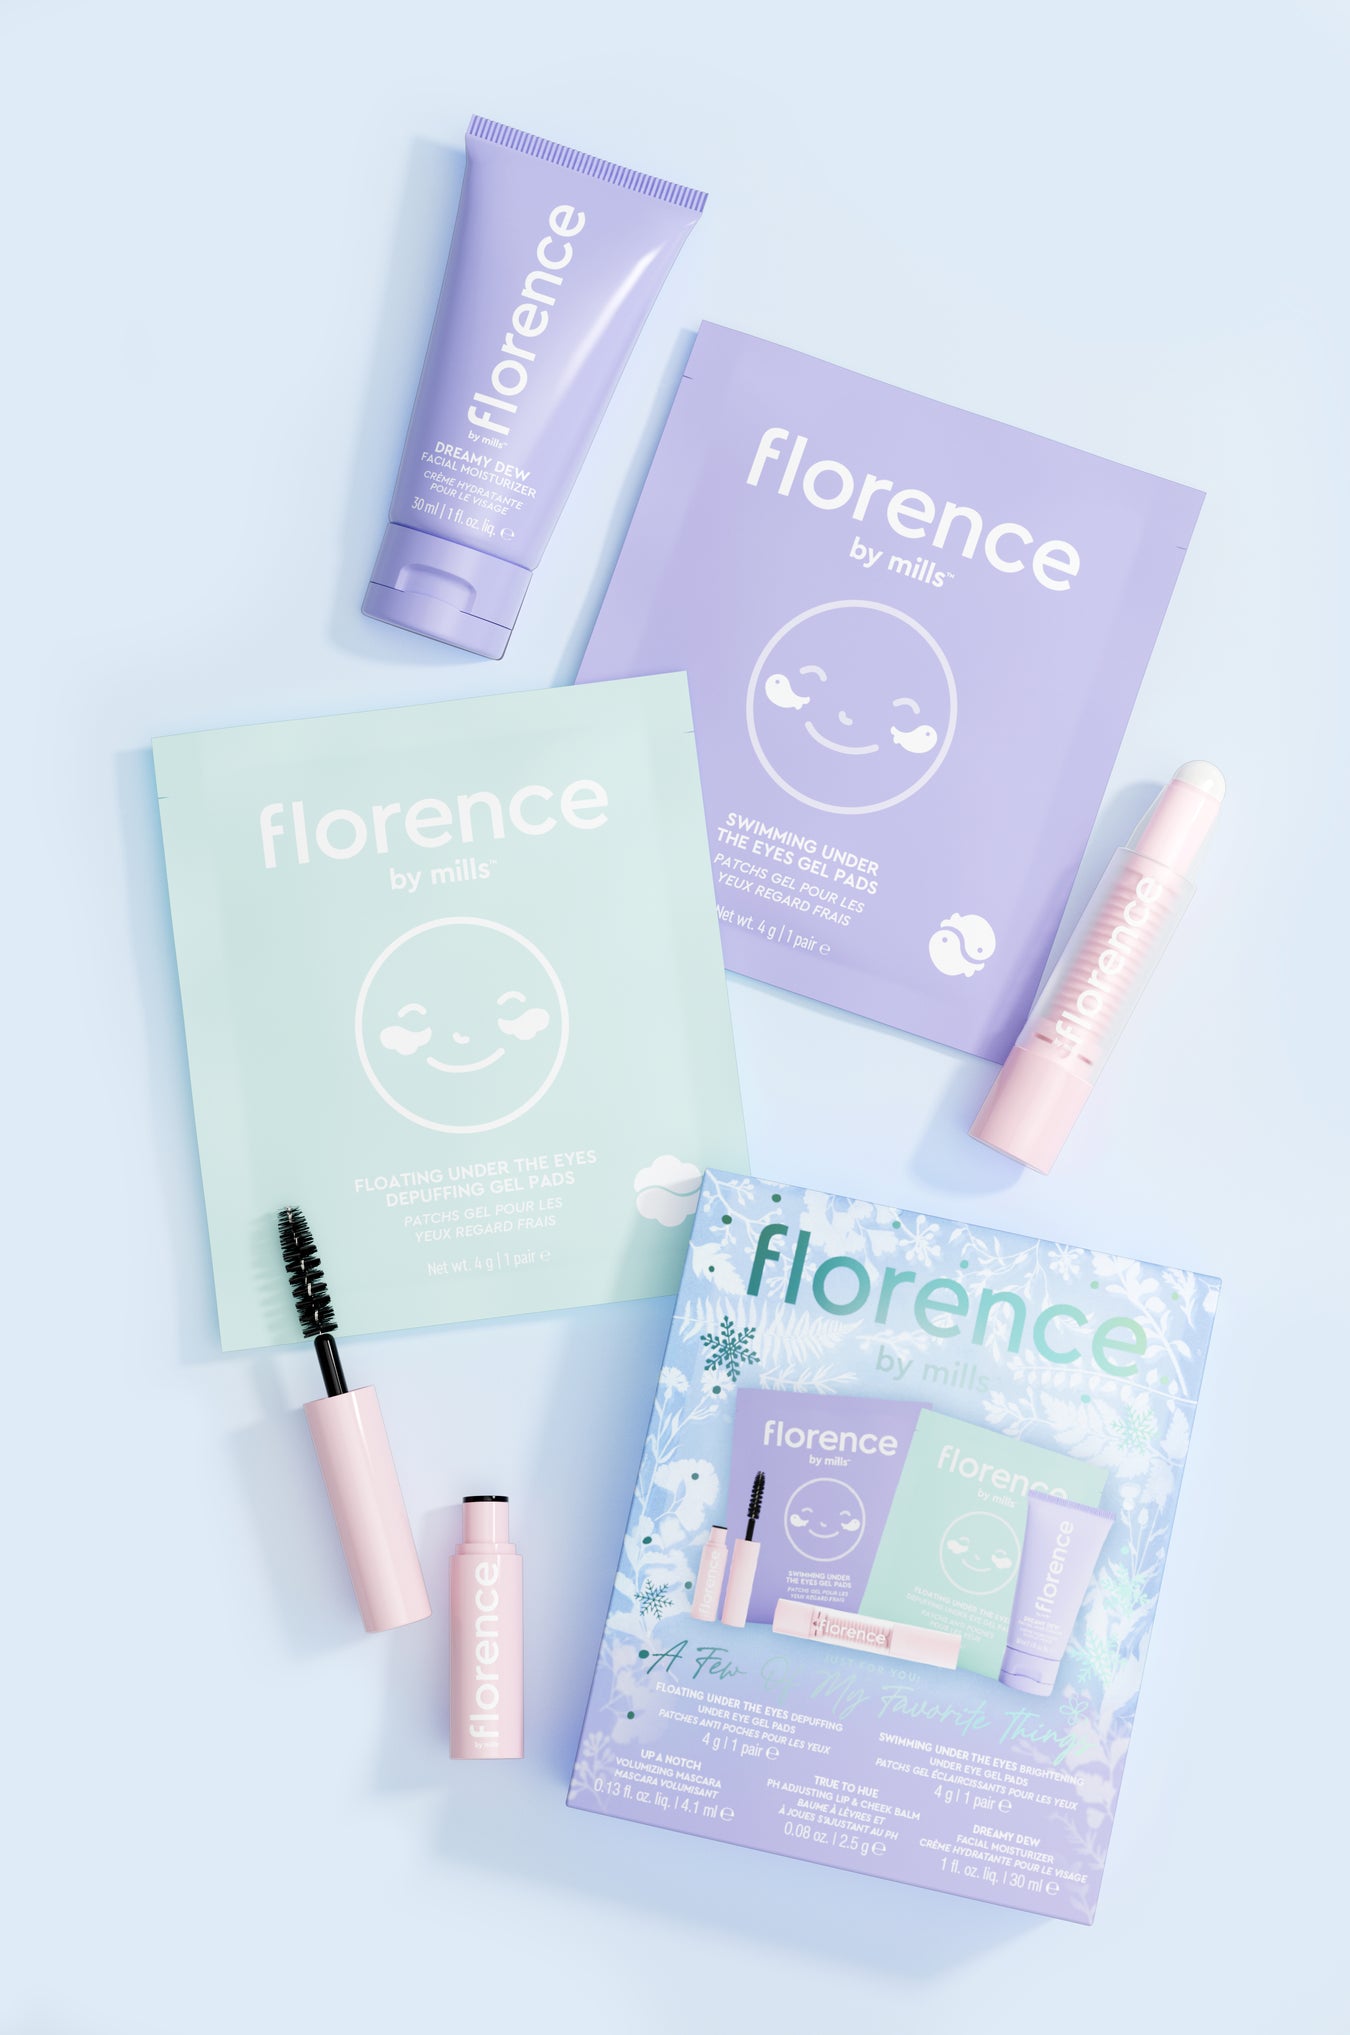 Say bye bye to puffy under eyes thanks to the @florence by mills